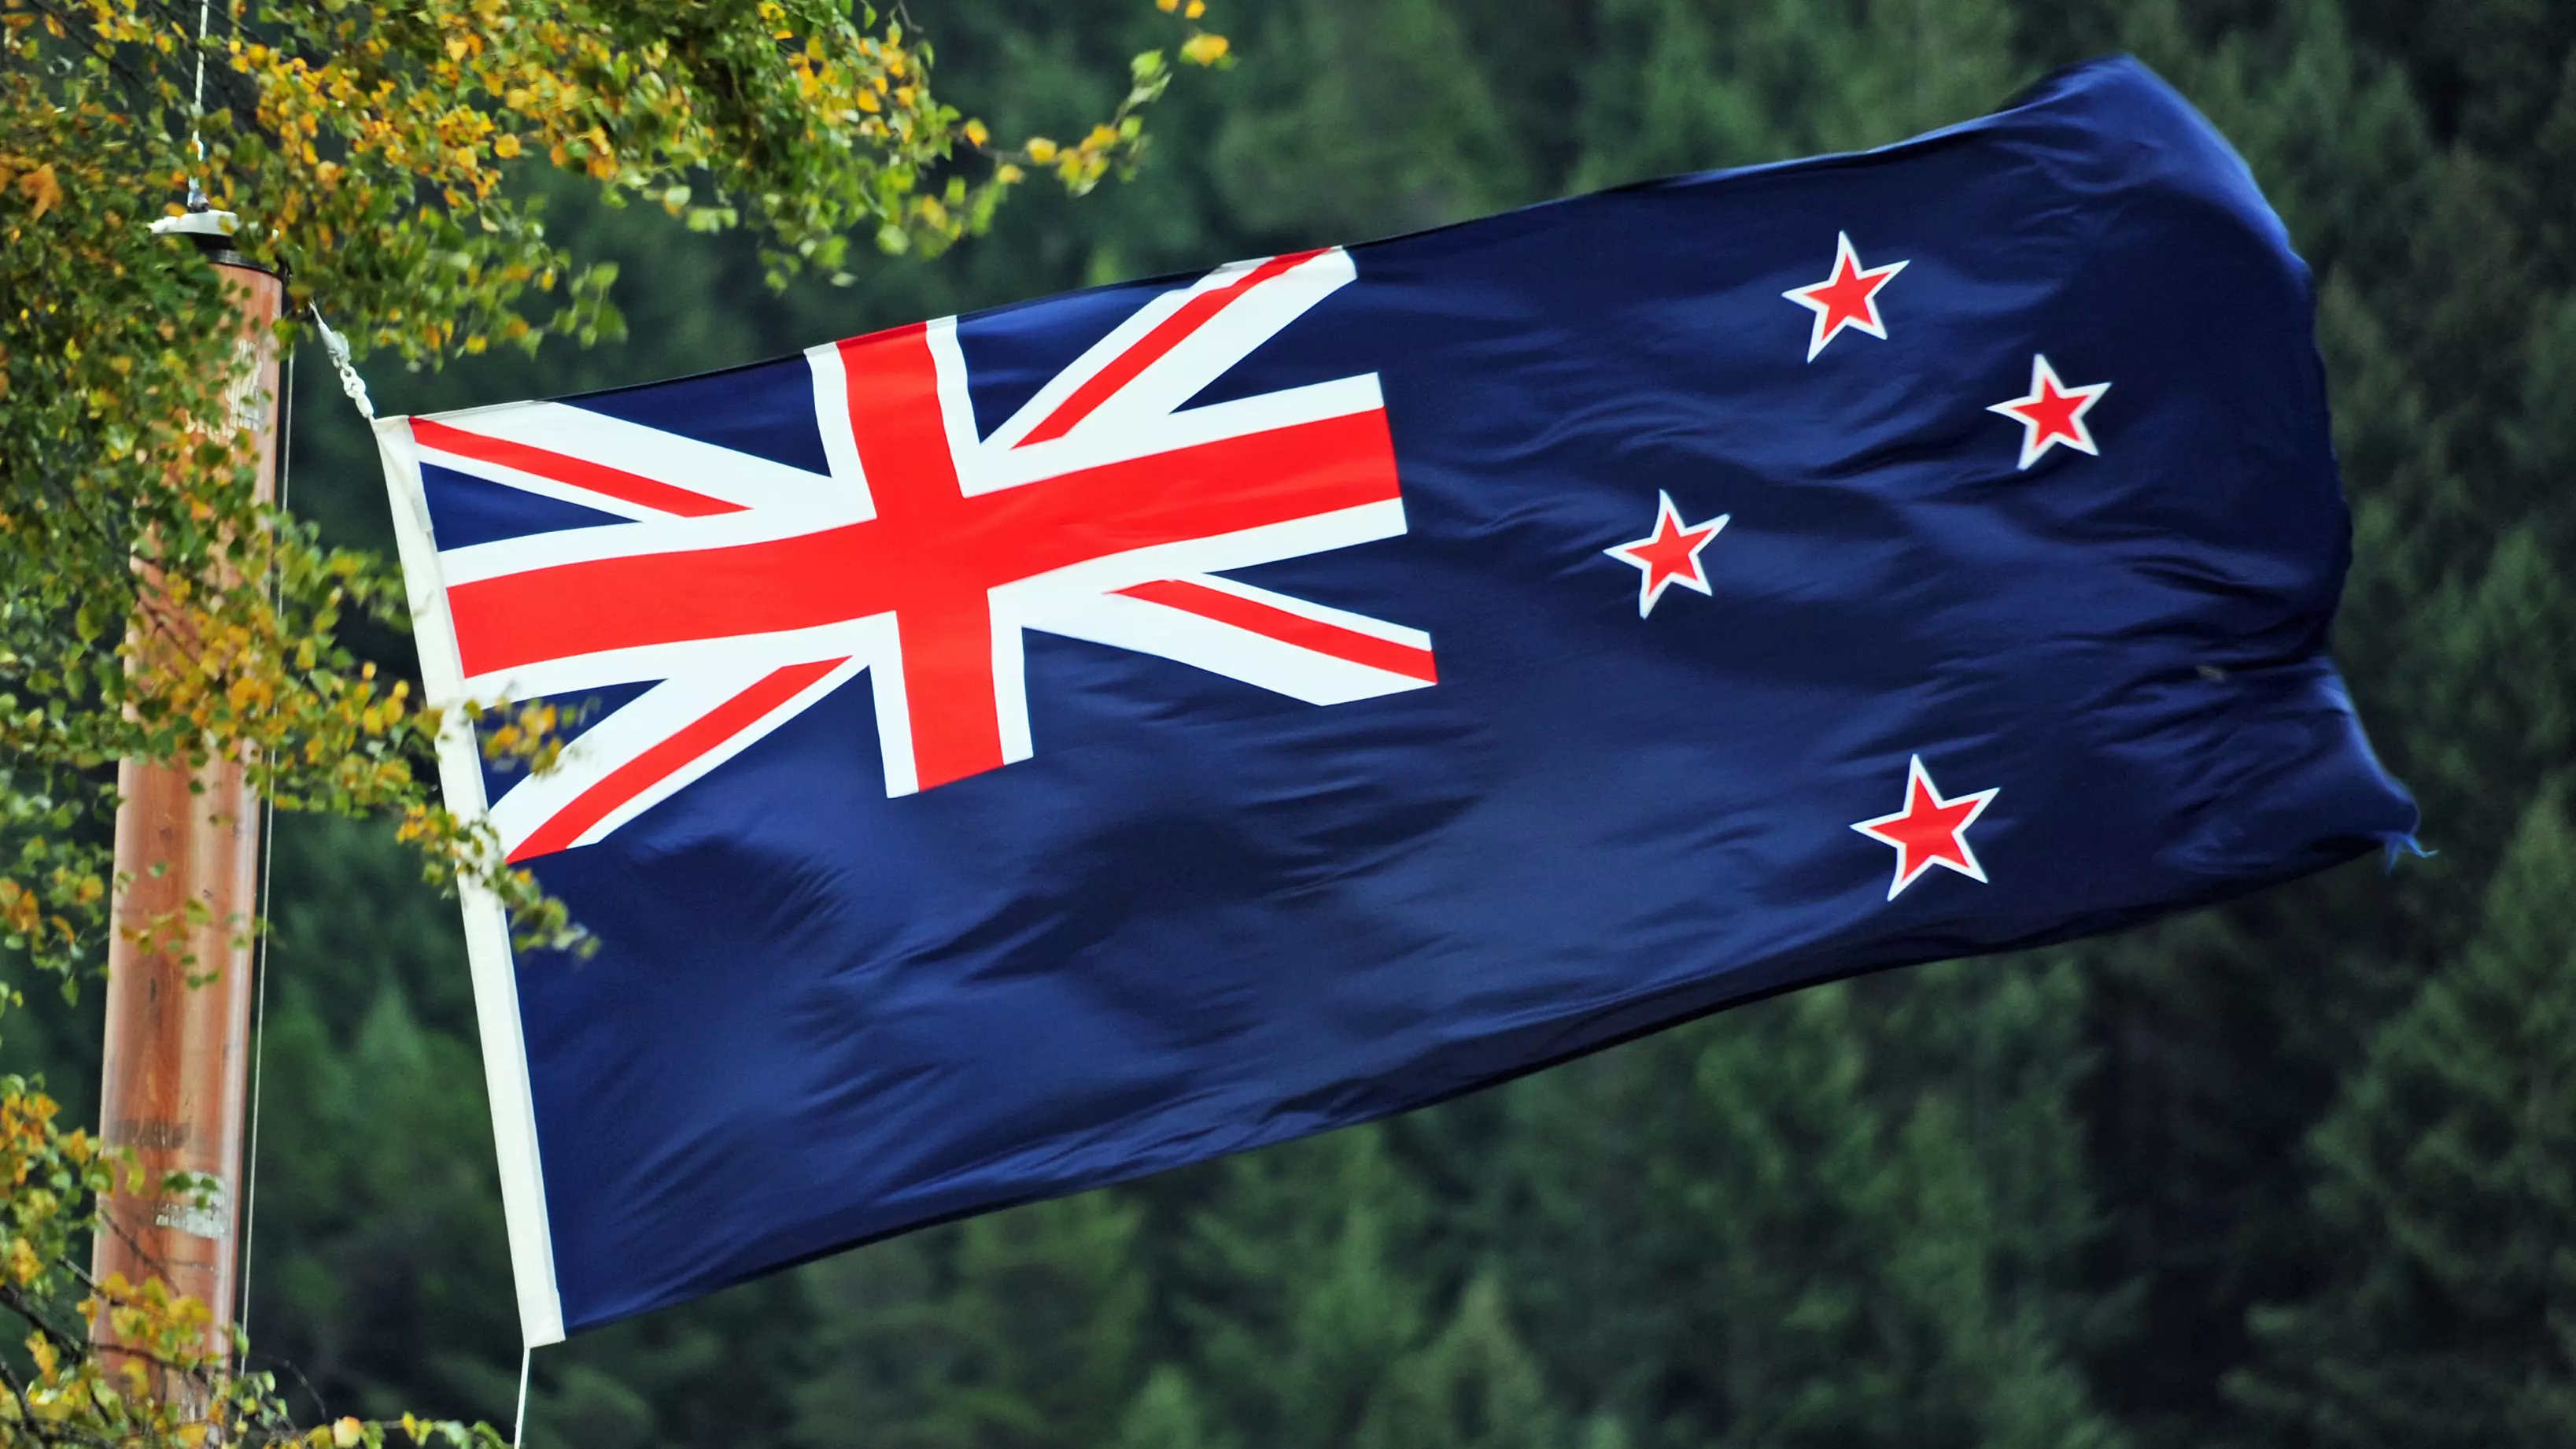 The Māori Party Want New Zealand's Name To Be Changed To Aotearoa